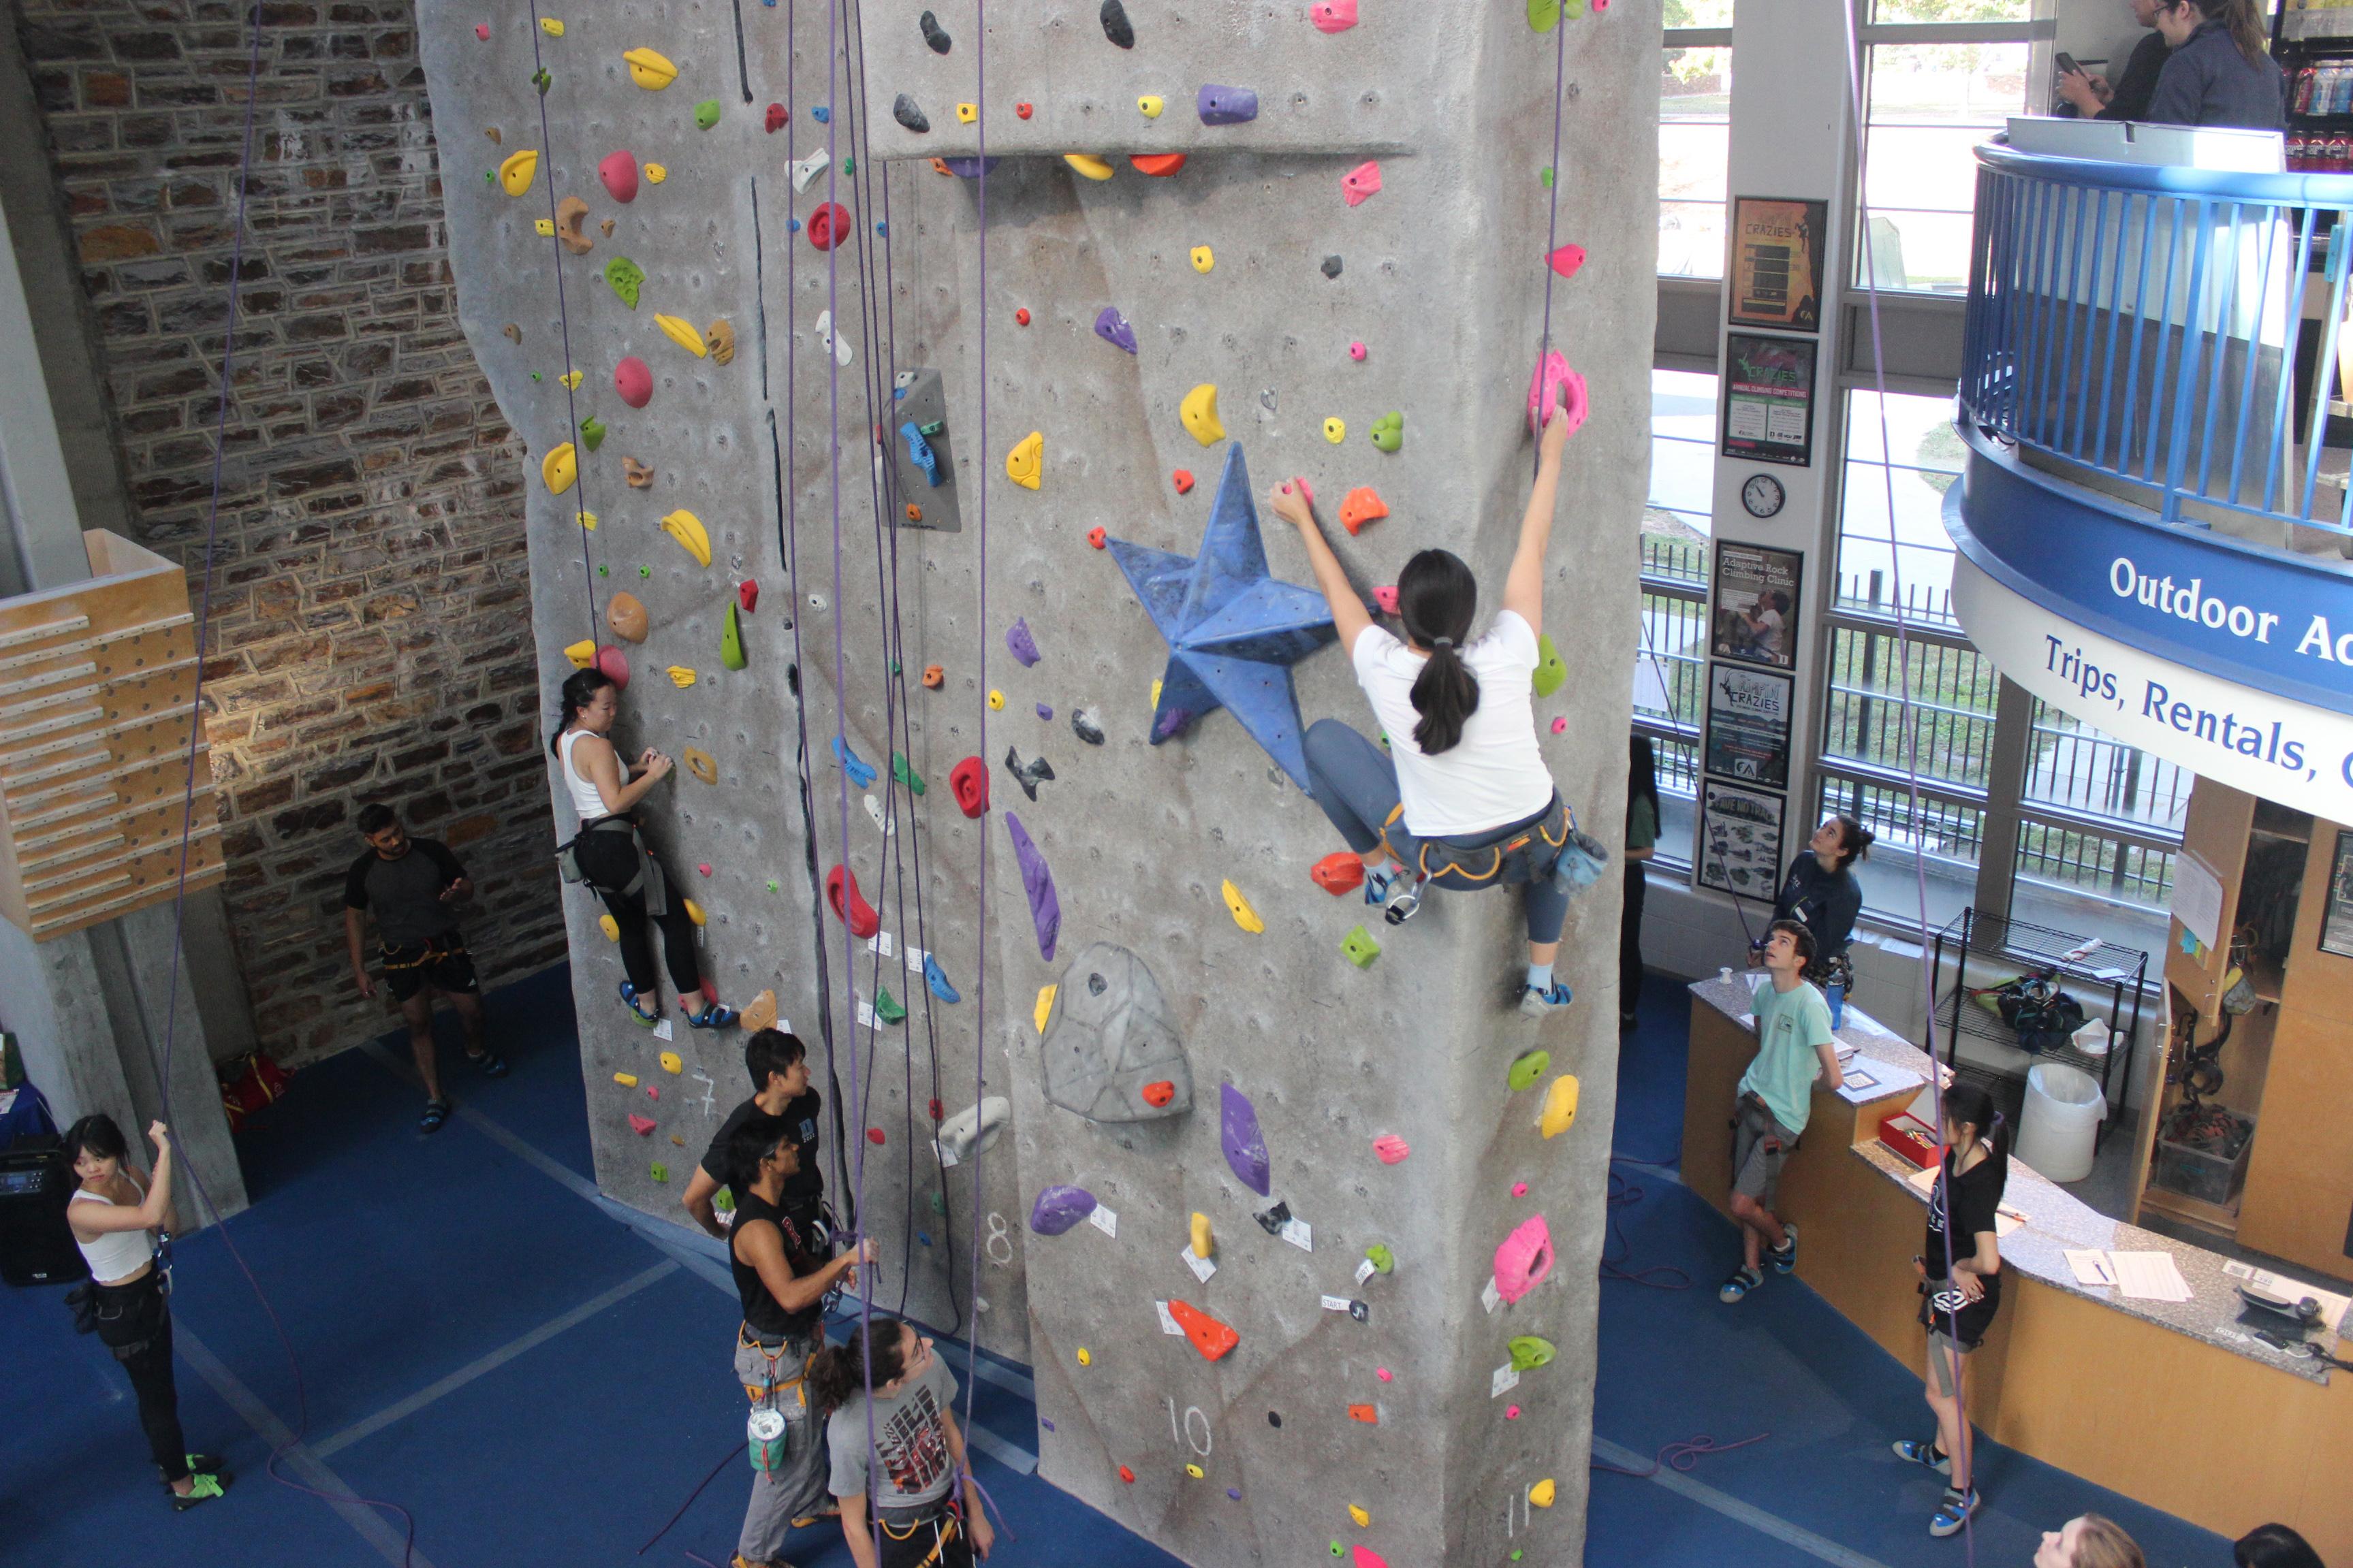 Participants climbing and belaying at the Wilson Climbing Wall